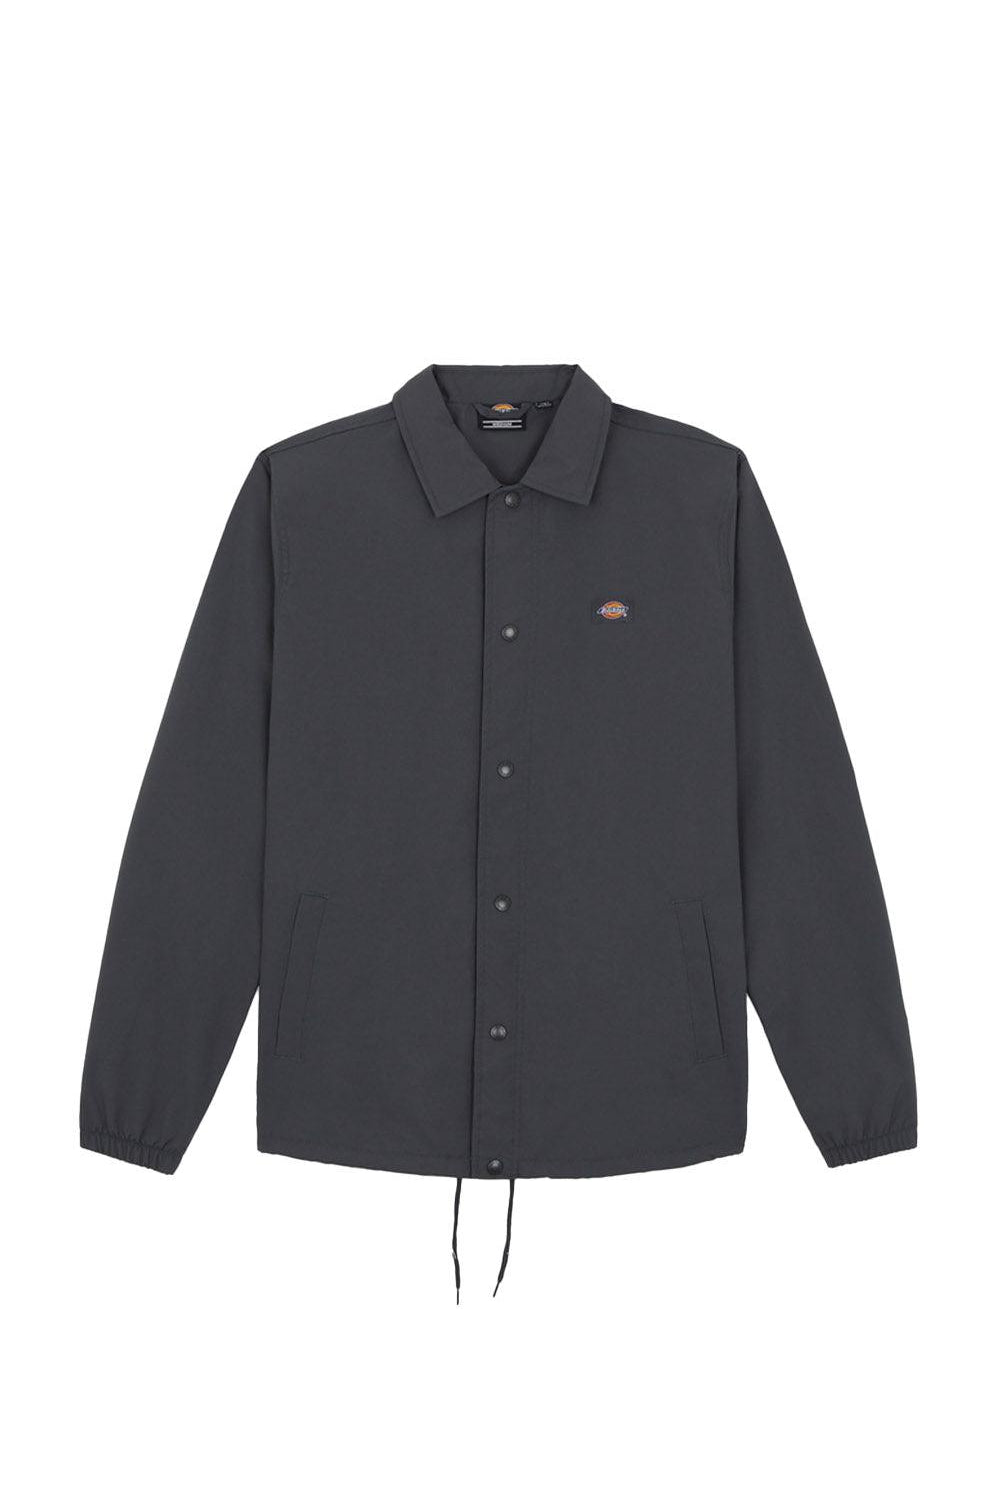 Dickies | Oakport Coach Charcoal Grey  6 | Milagron